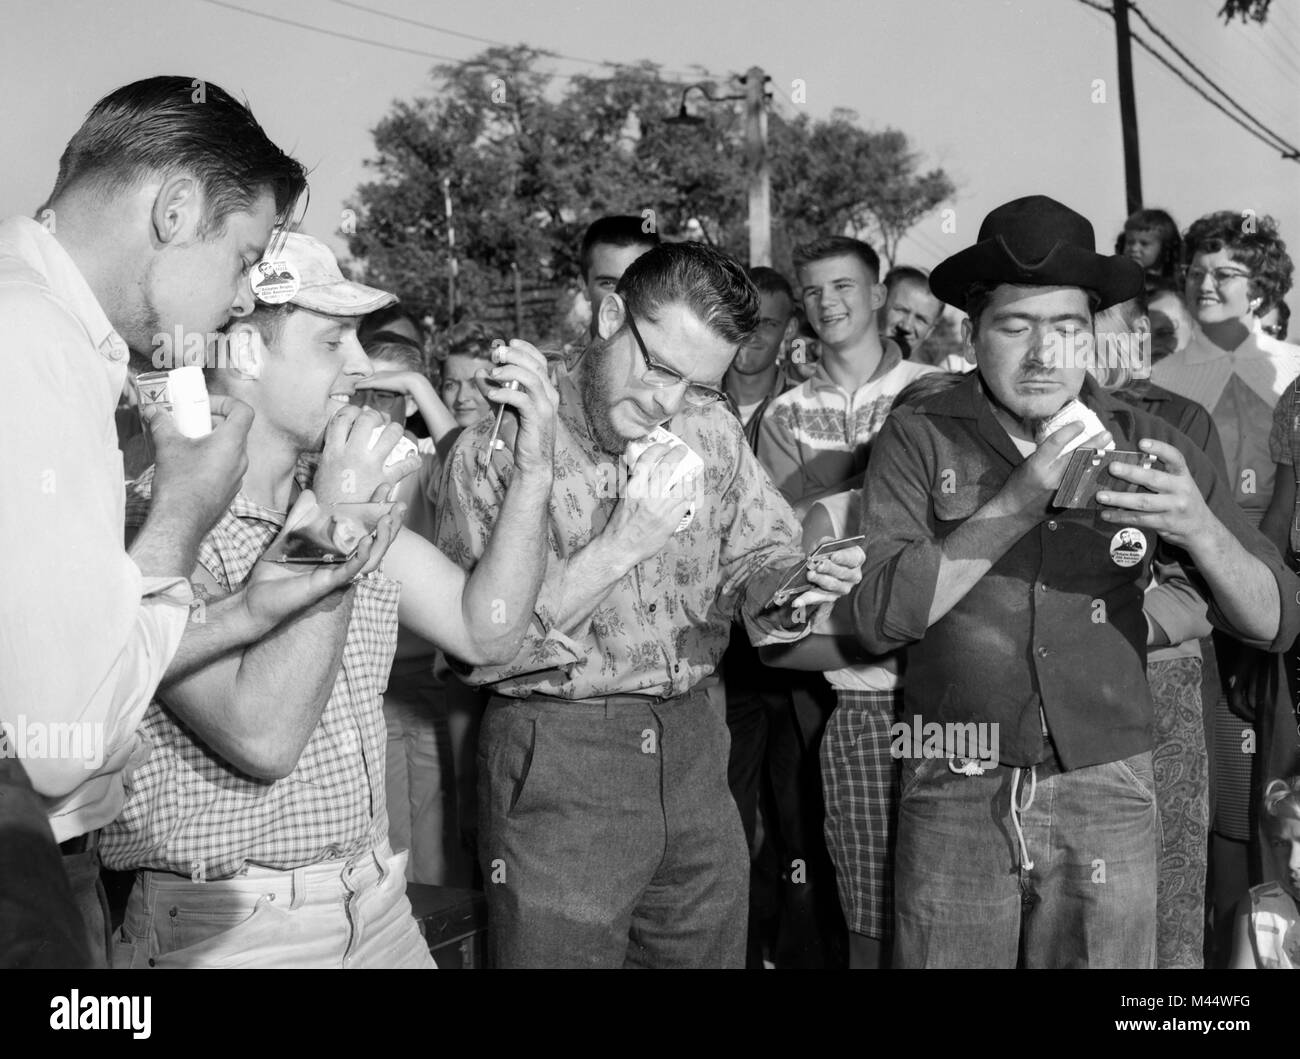 Men use the new technology of battery-powered electric shavers in a shaving contest in Illinois, ca. 1964. Stock Photo